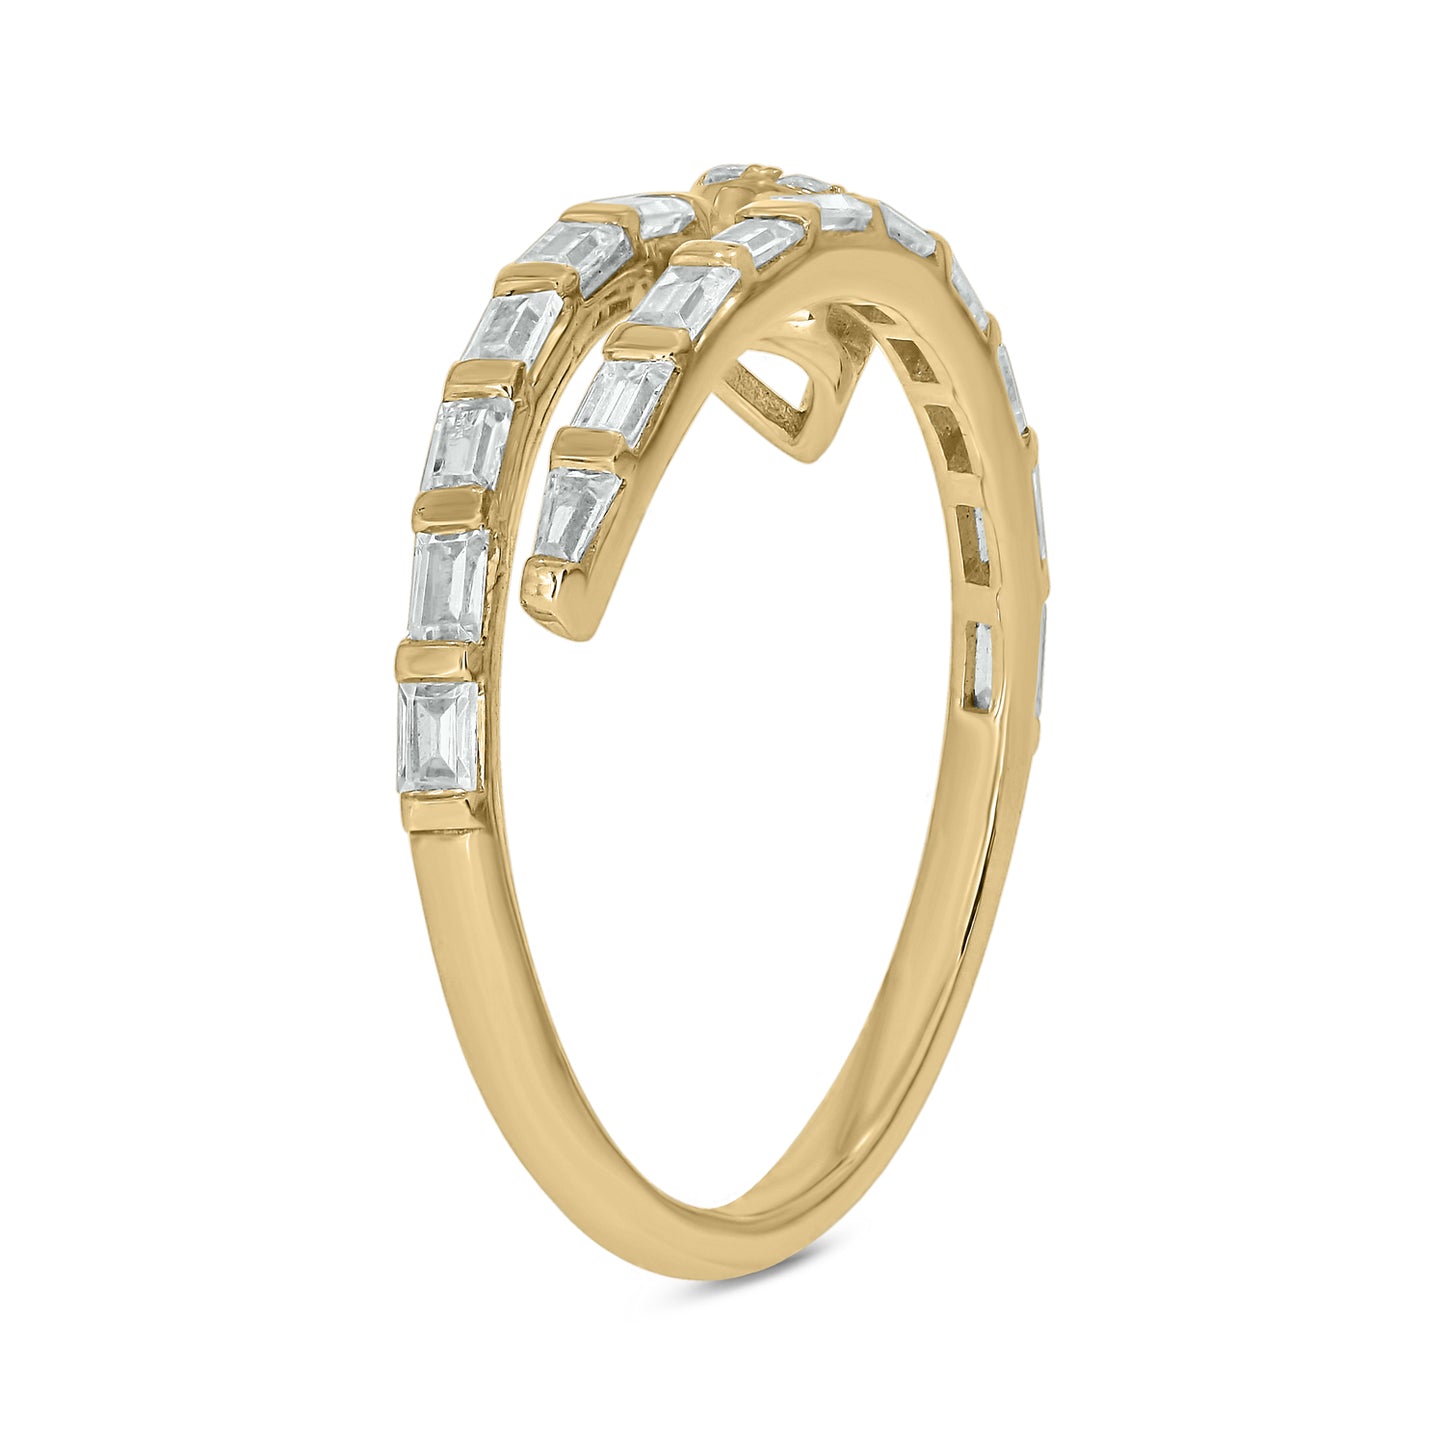 14KT Gold Round & Baguette Pear Shaped Diamonds Stylish Open Ring